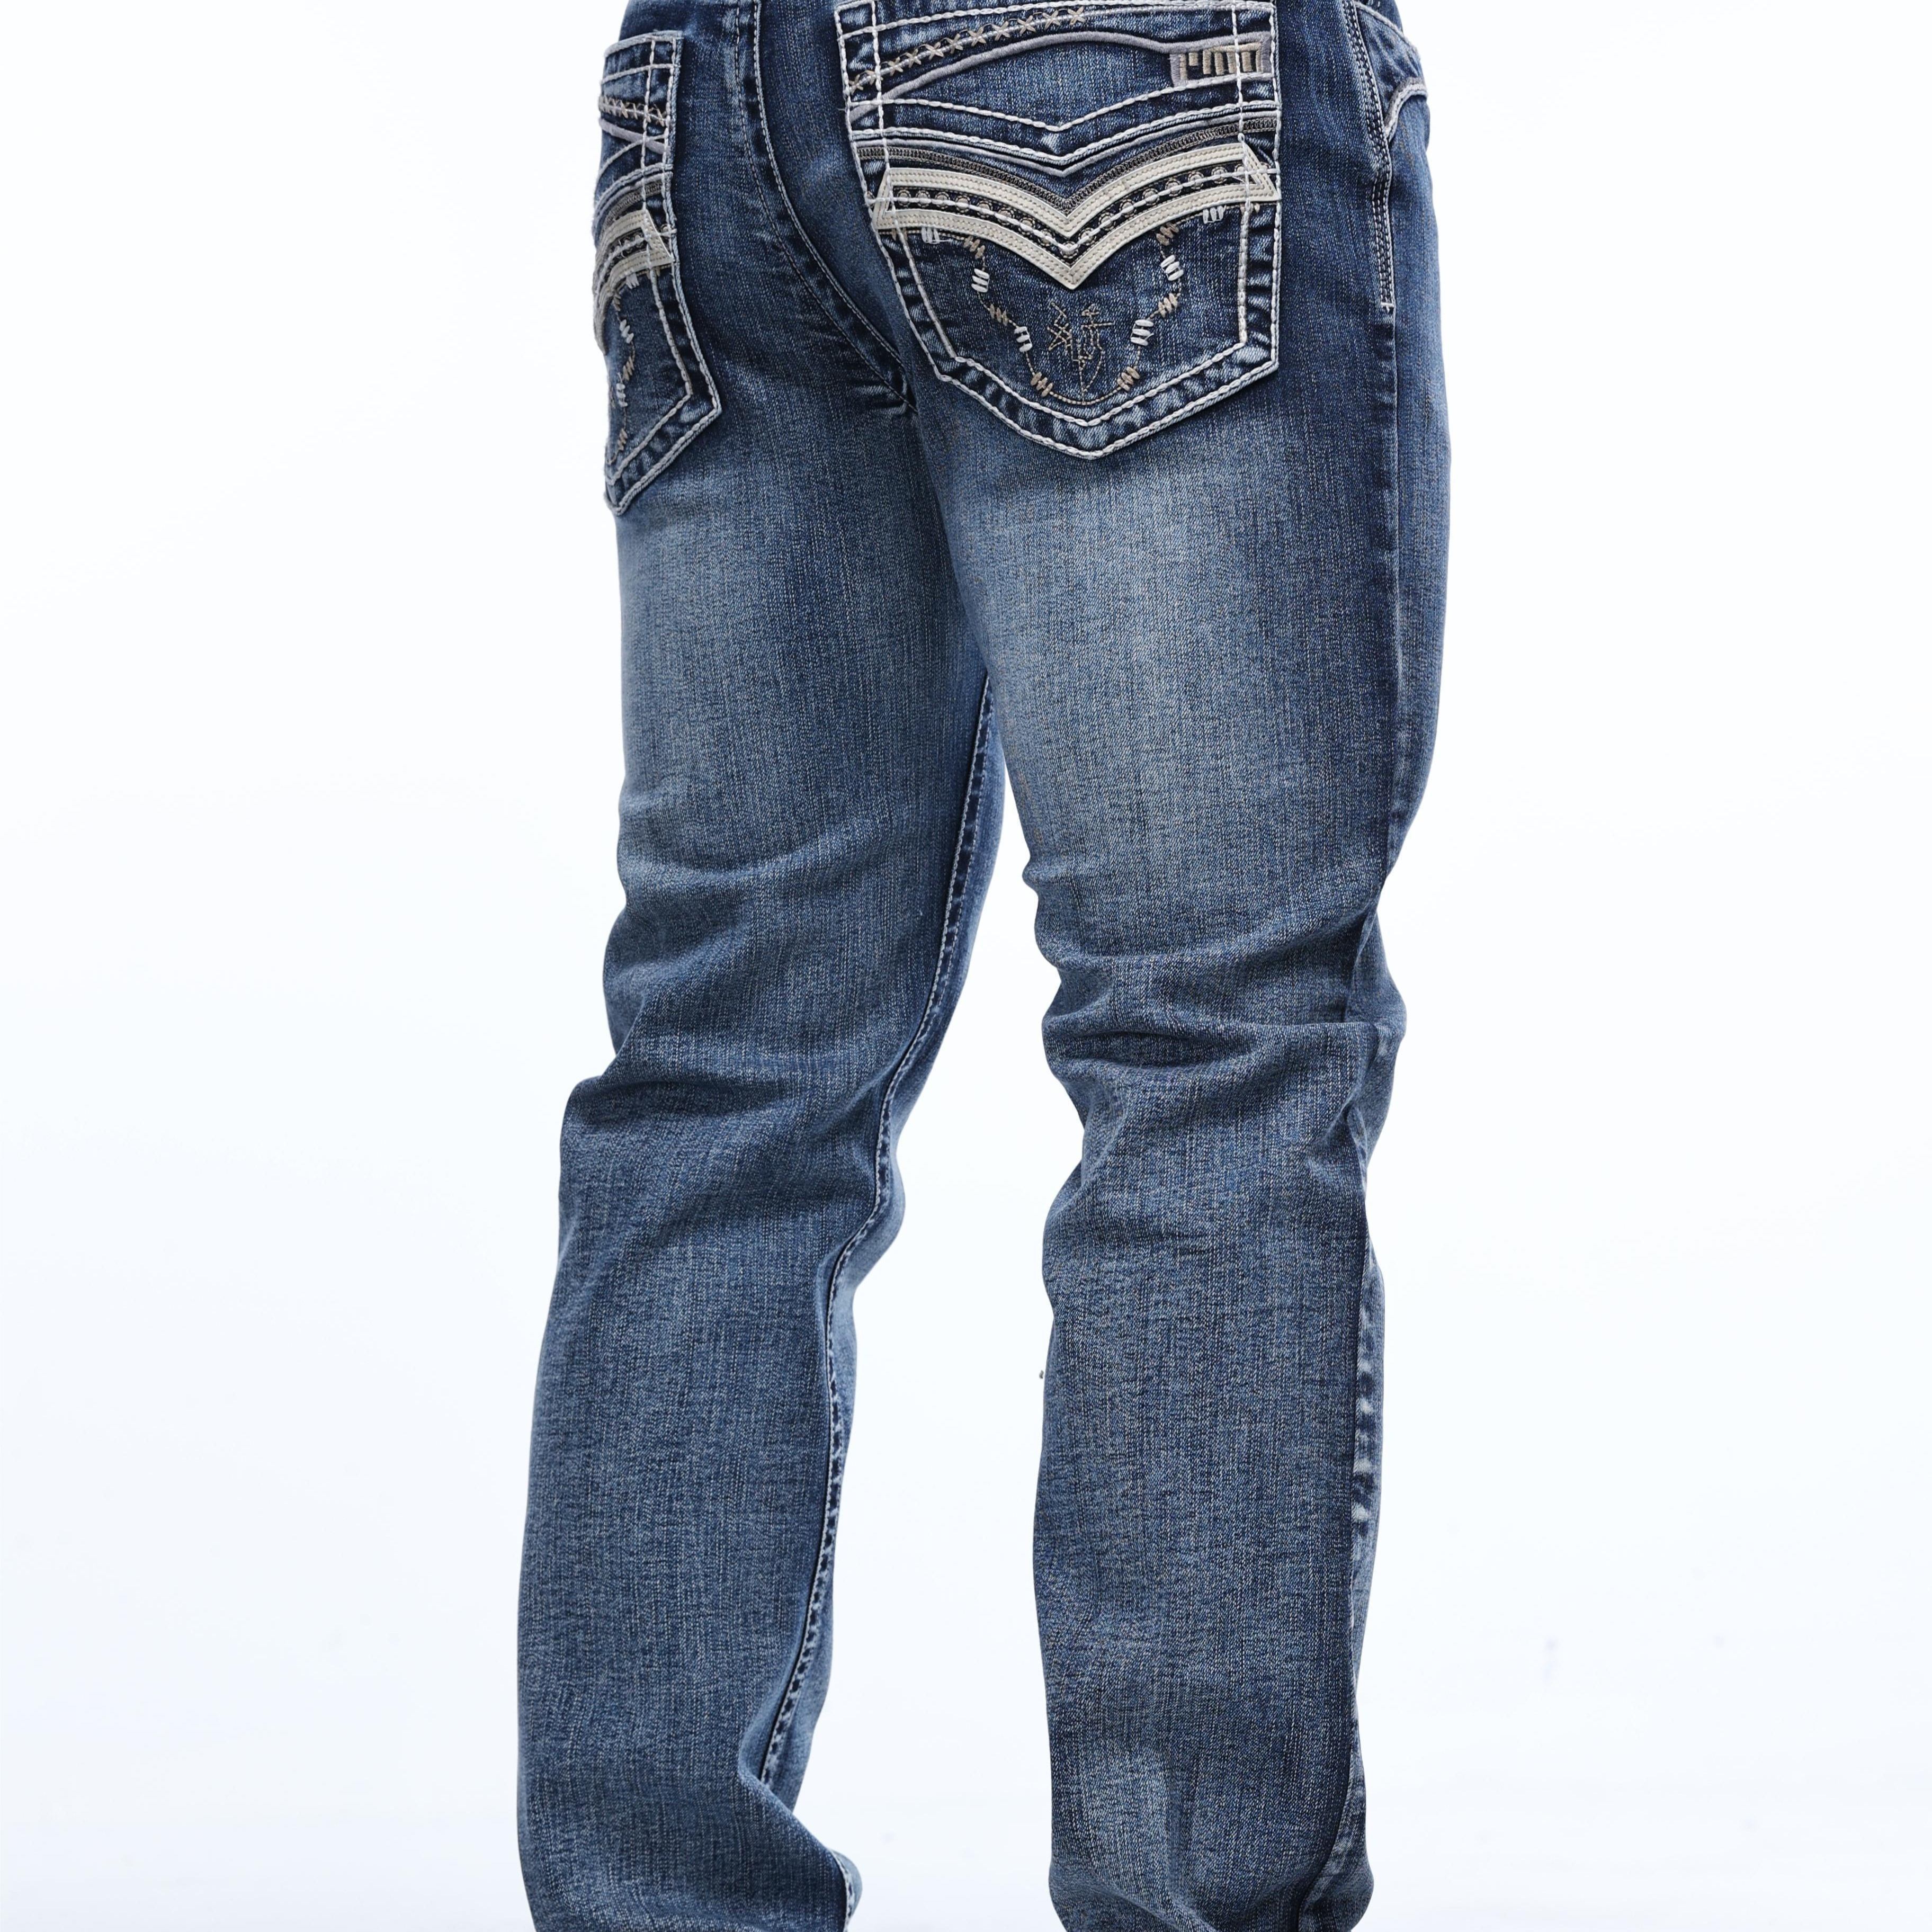 

Men's Slim Fit Jeans With Embroidered Design, Retro Style Denim Pants For Men, Versatile For All Seasons